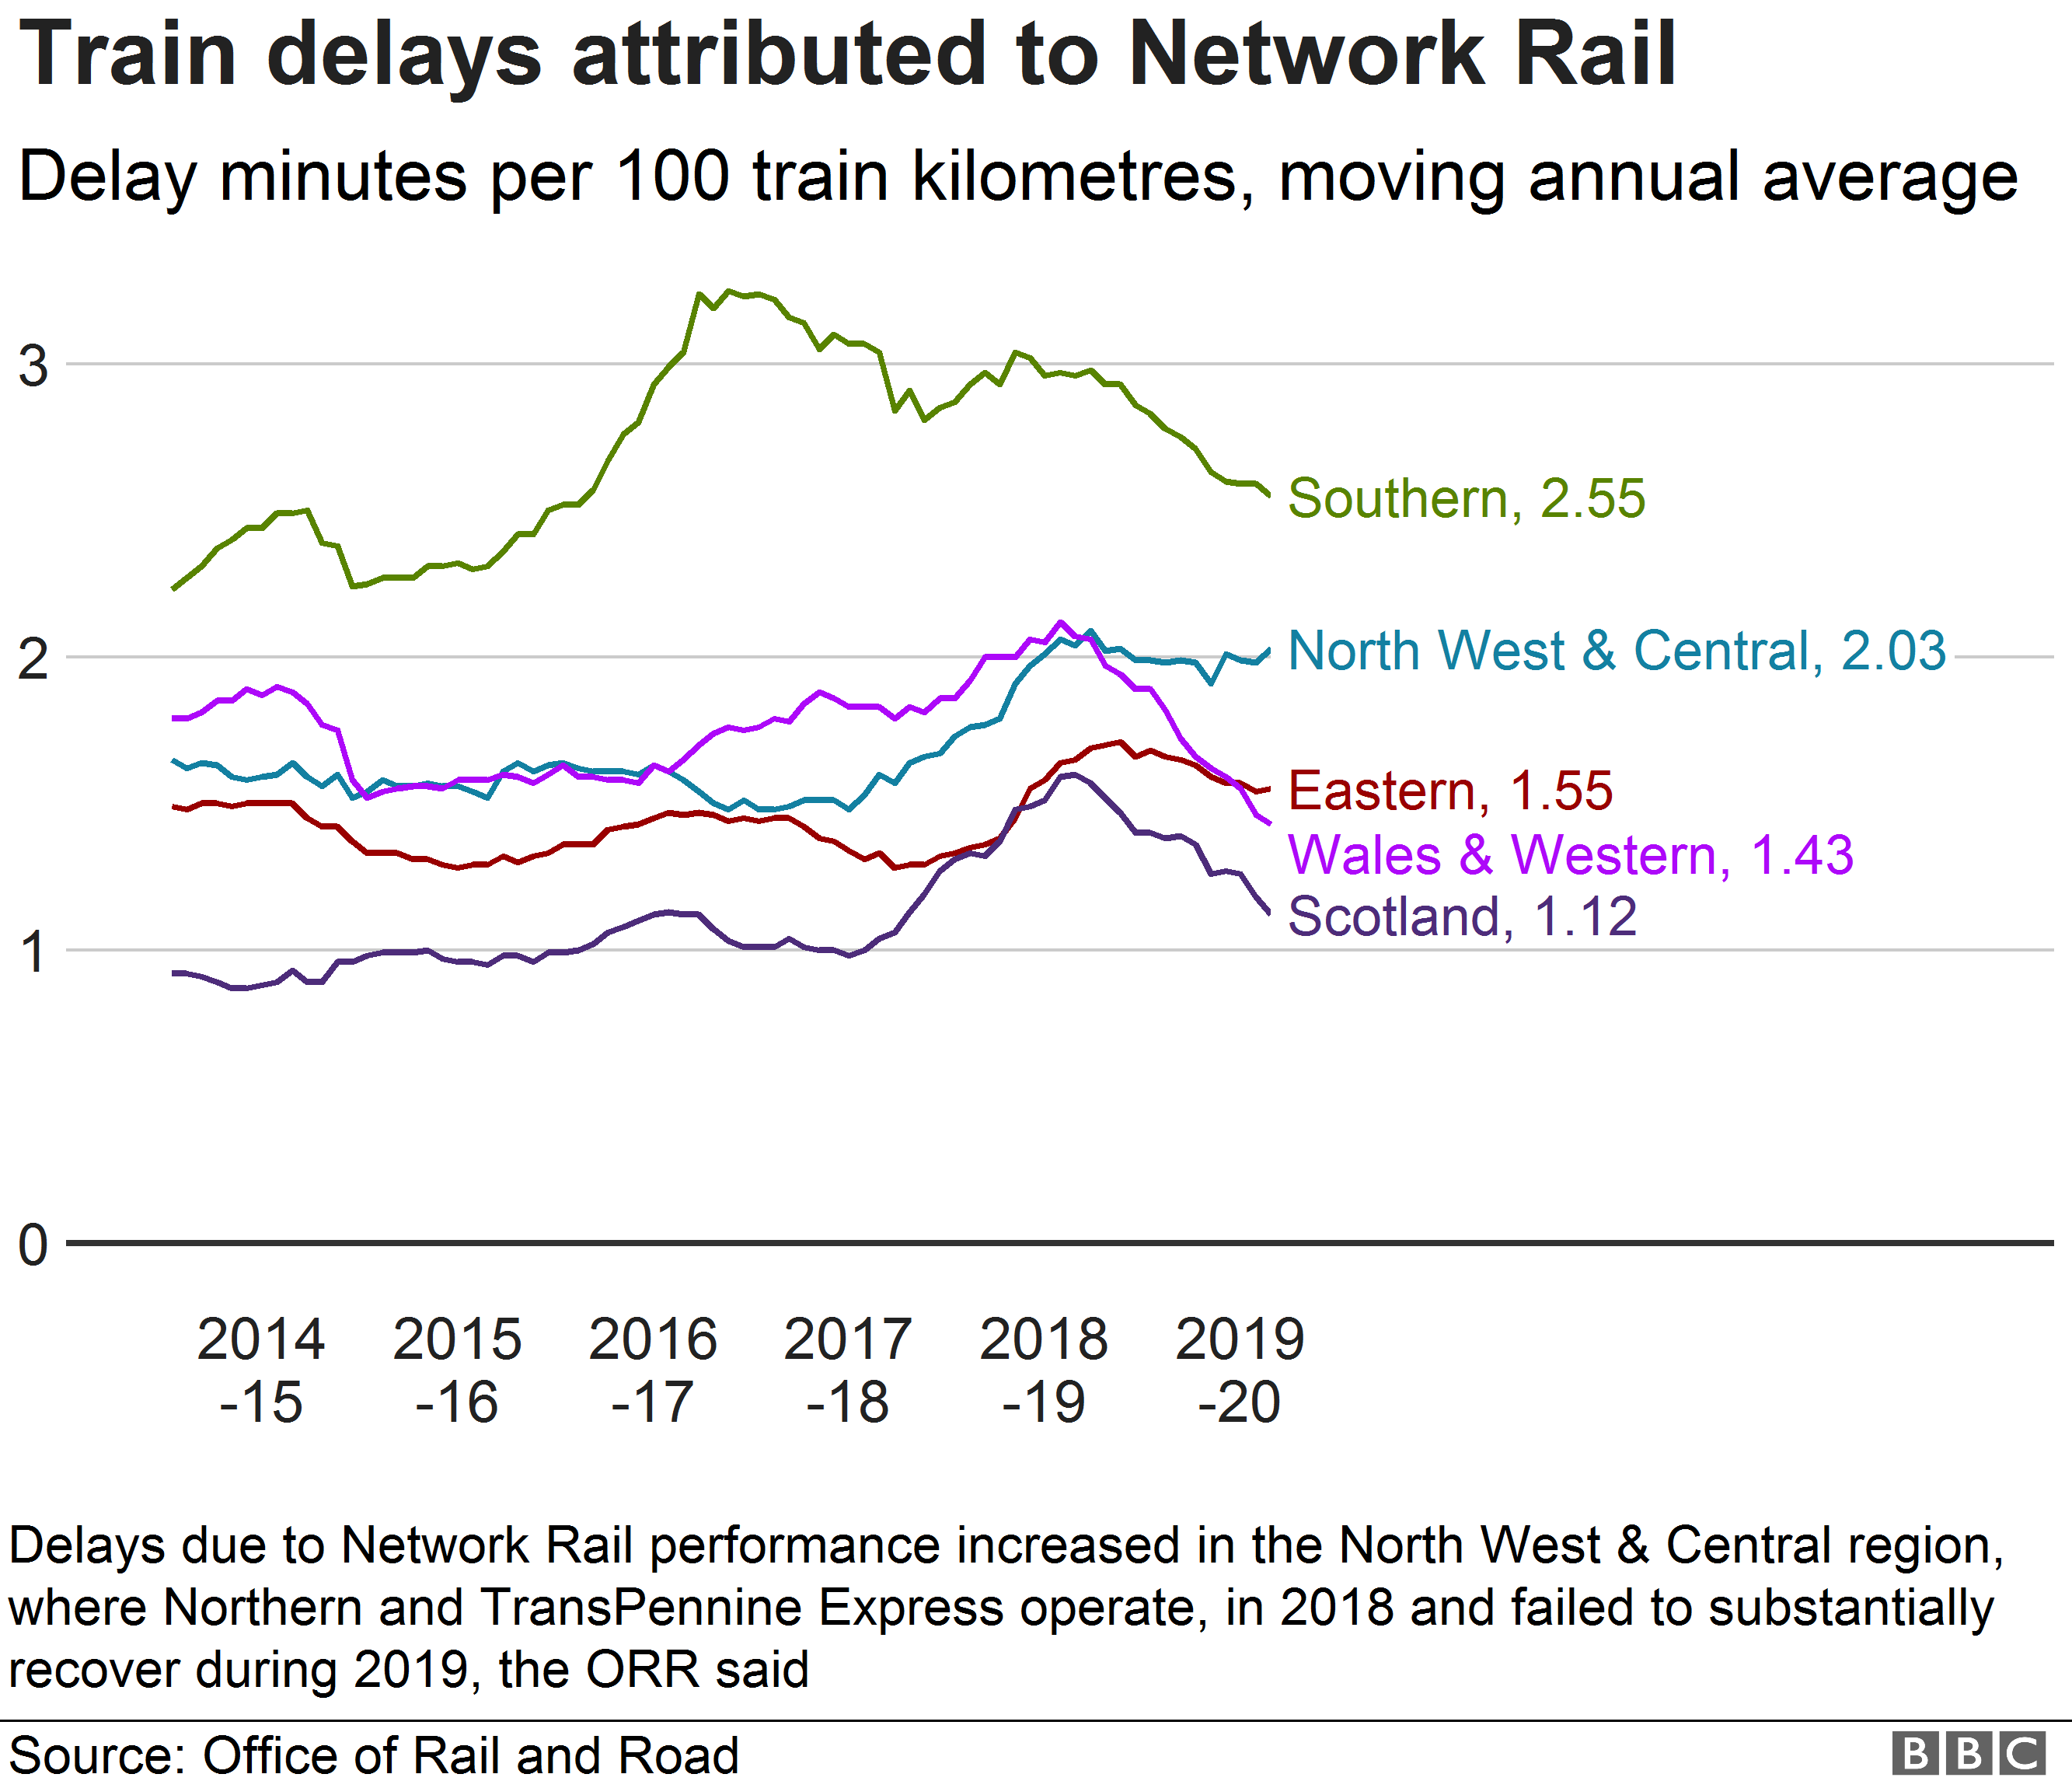 Chart showing delay minutes attributed to Network Rail by region